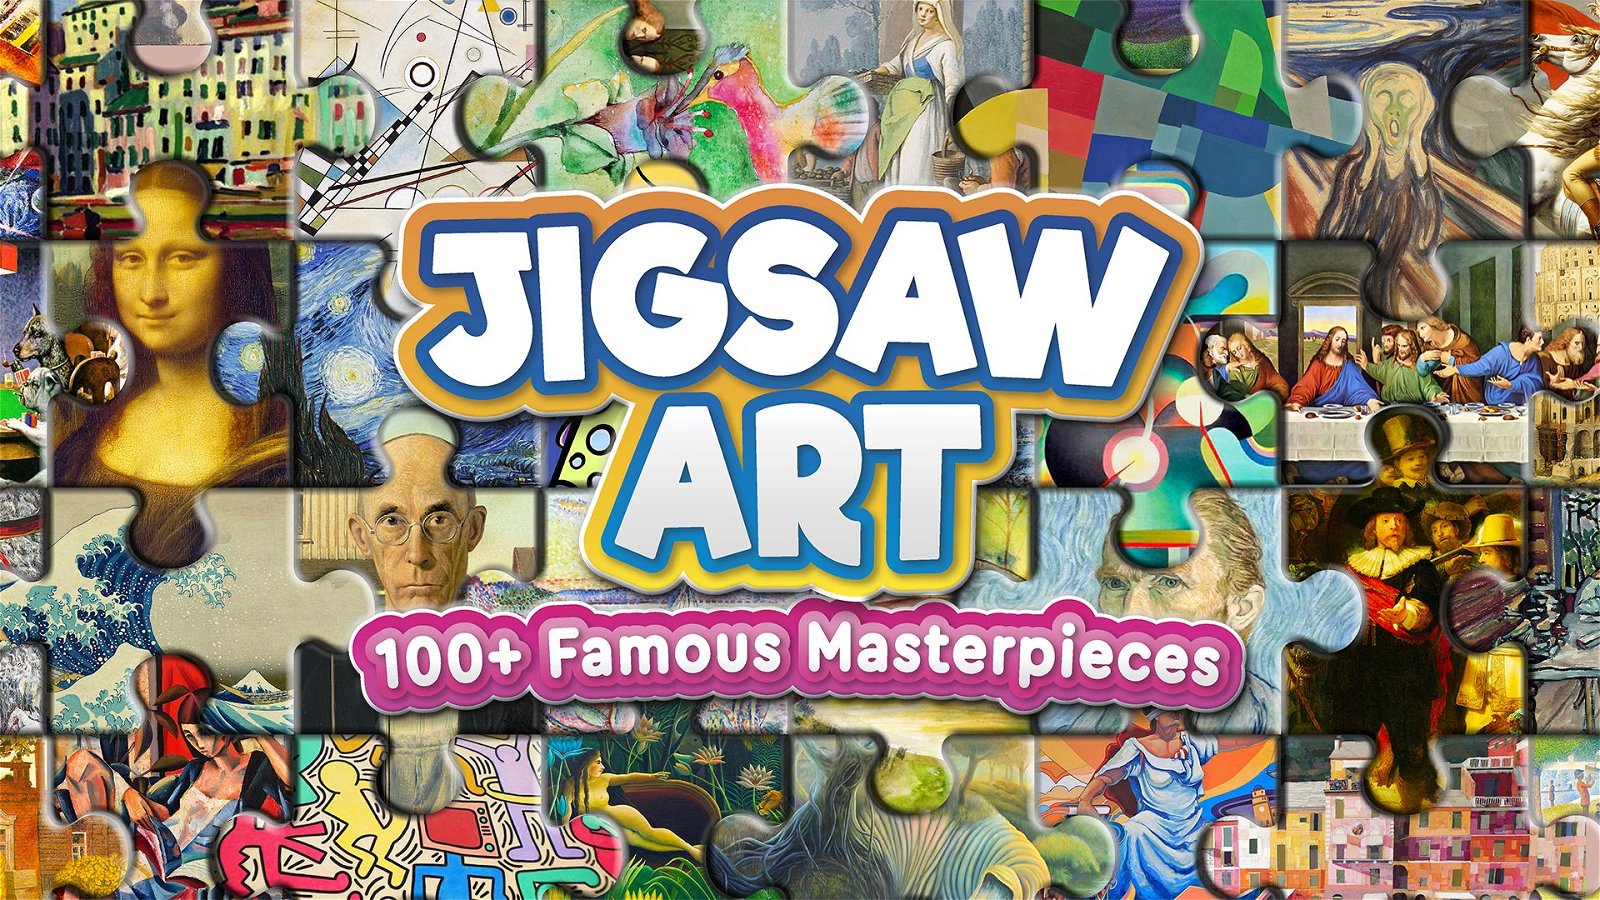 Image of Jigsaw Art: 100+ Famous Masterpieces